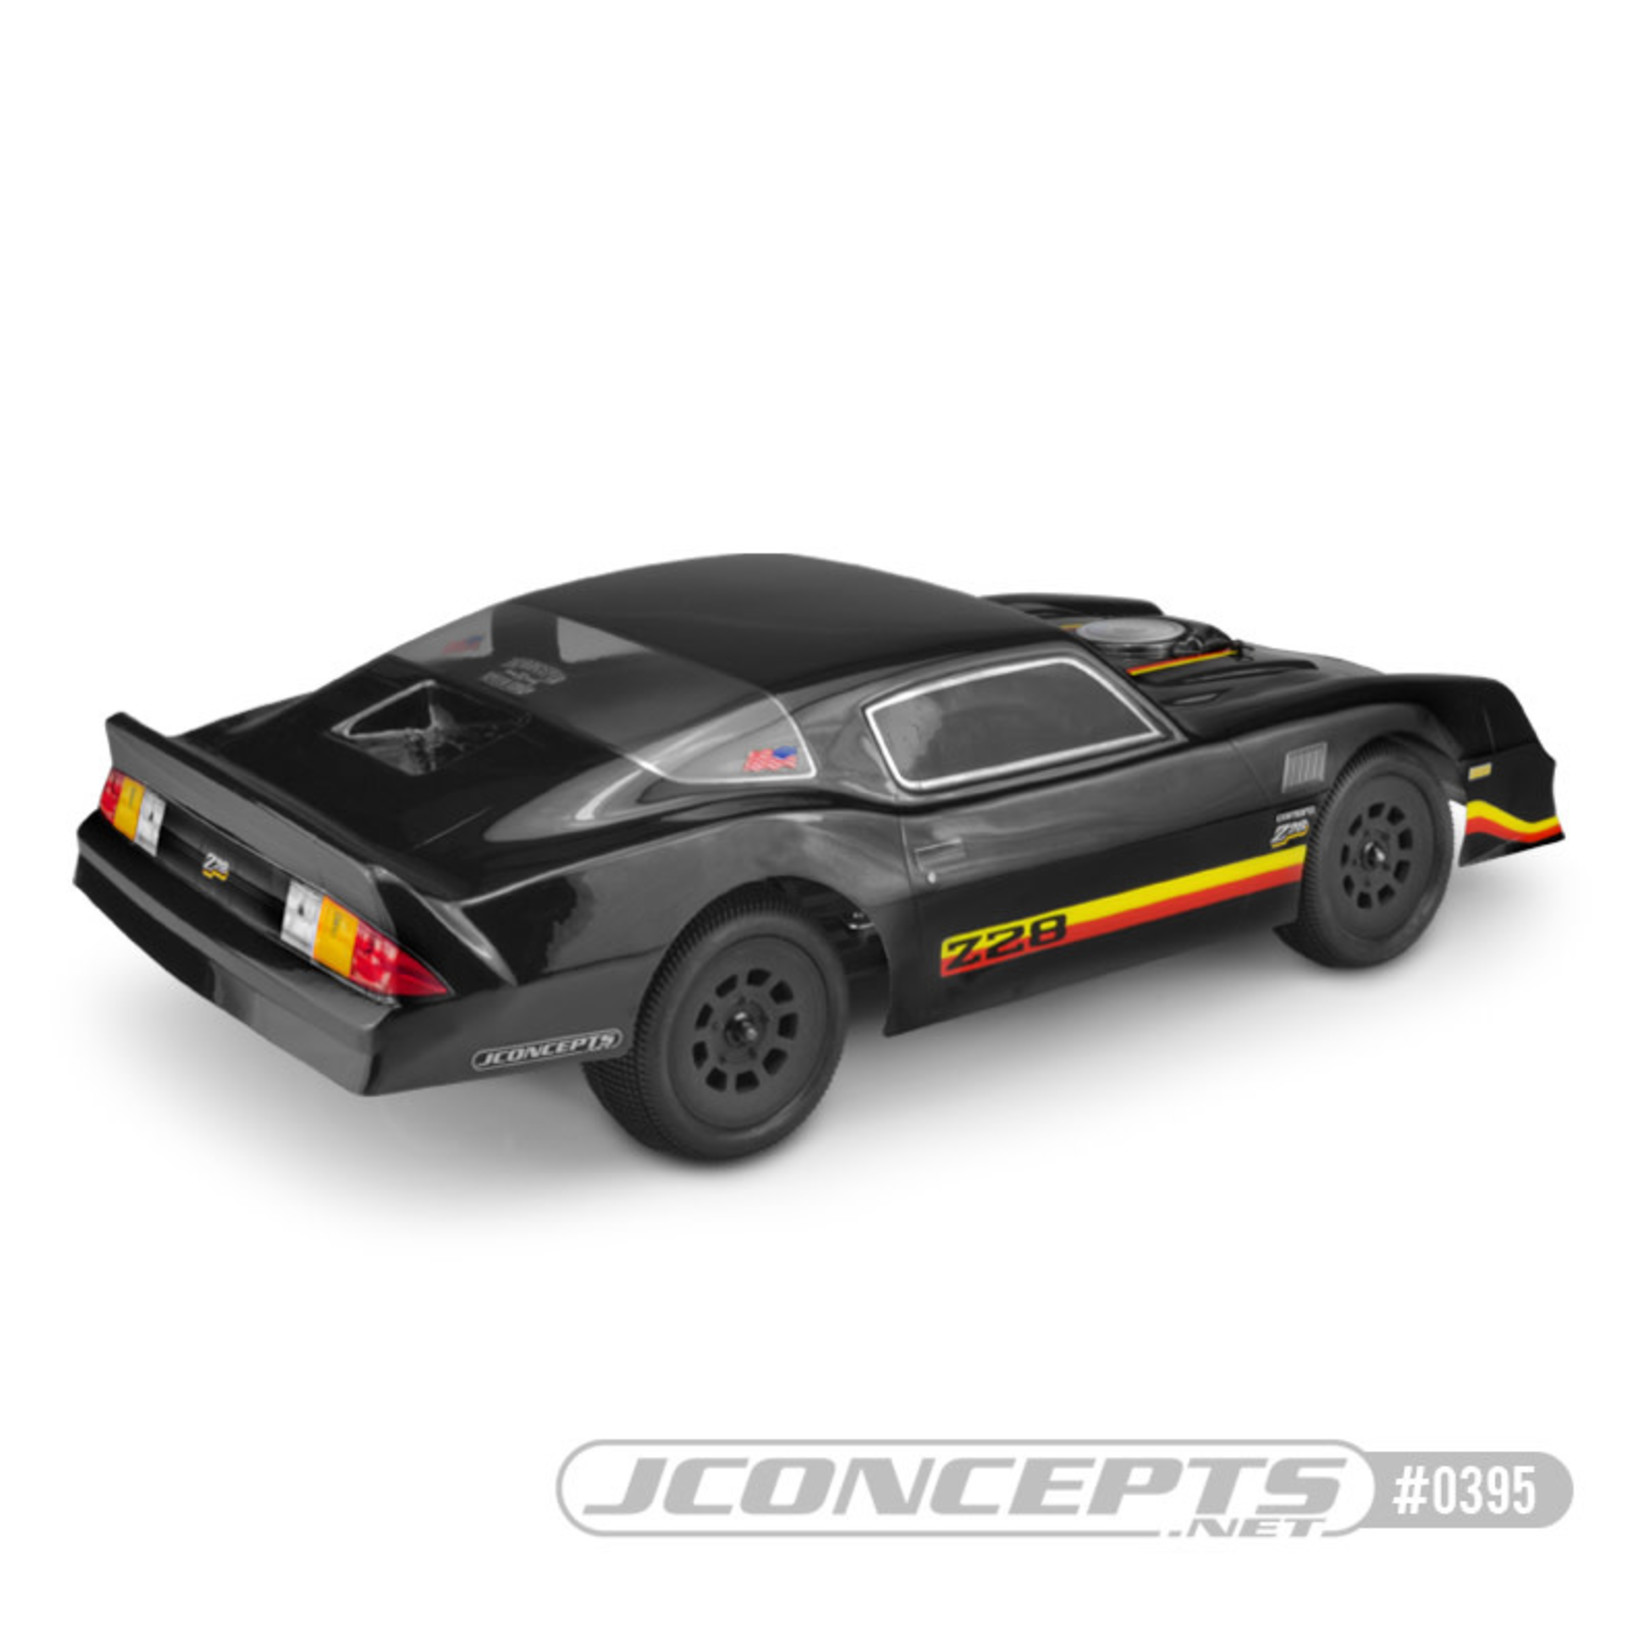 JConcepts JConcepts 1978 Chevy Camaro Street Stock Dirt Oval Body (Clear)